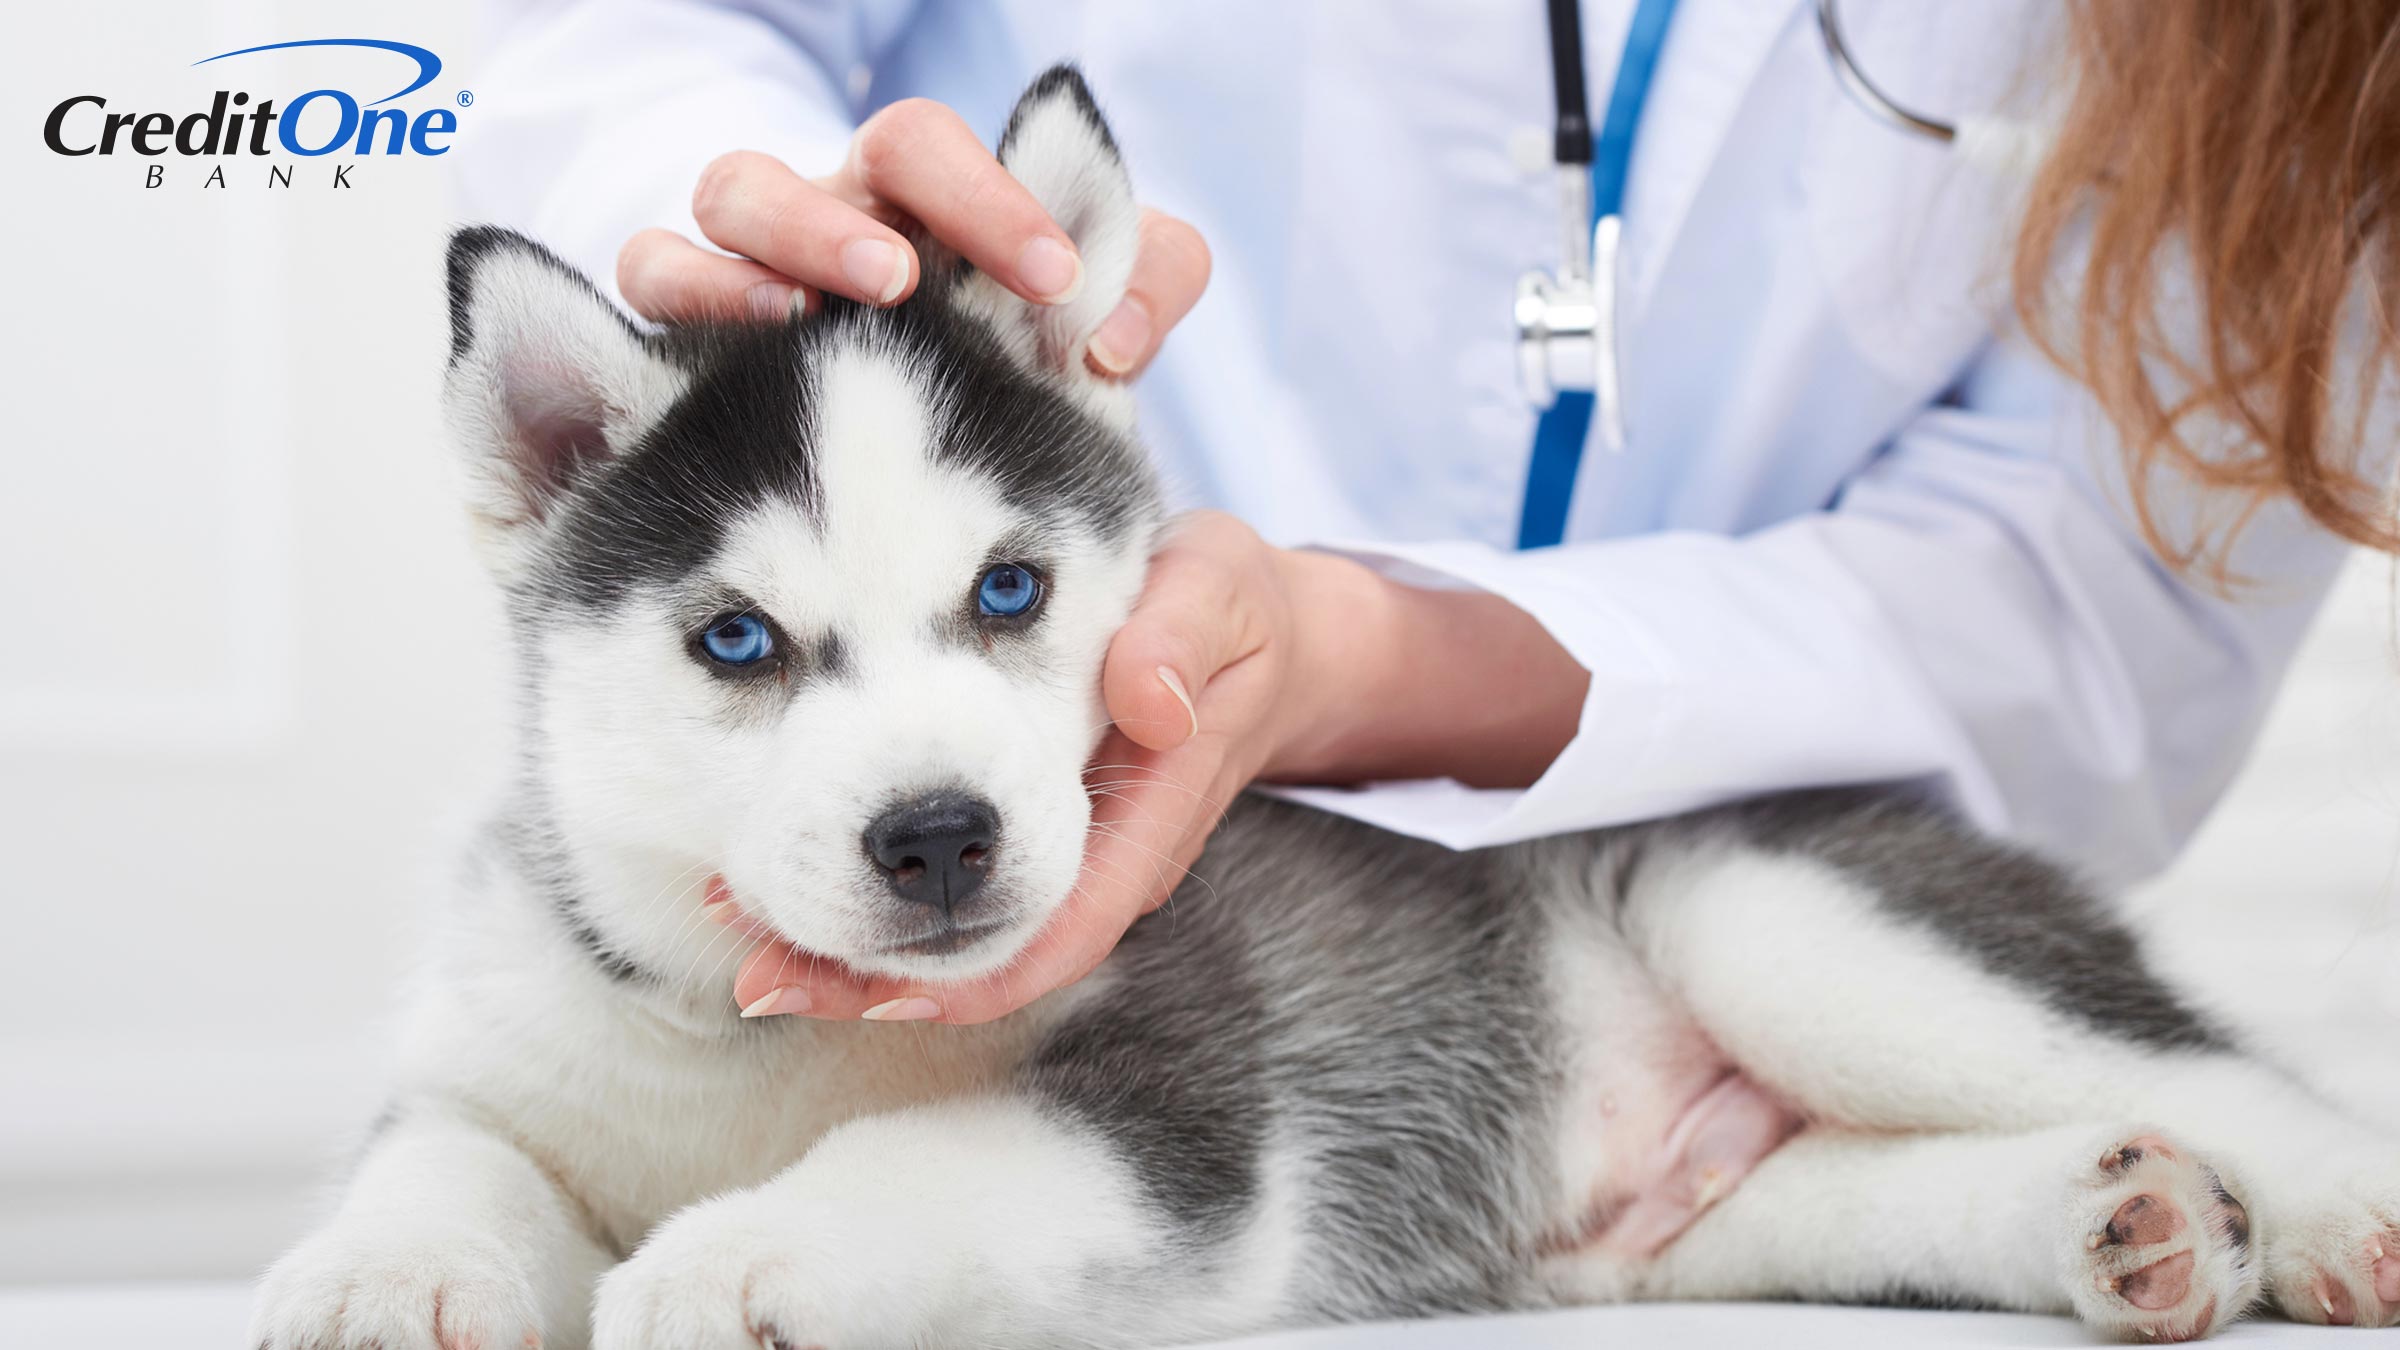 A cute husky puppy with pet insurance gets a checkup from the veterinarian.